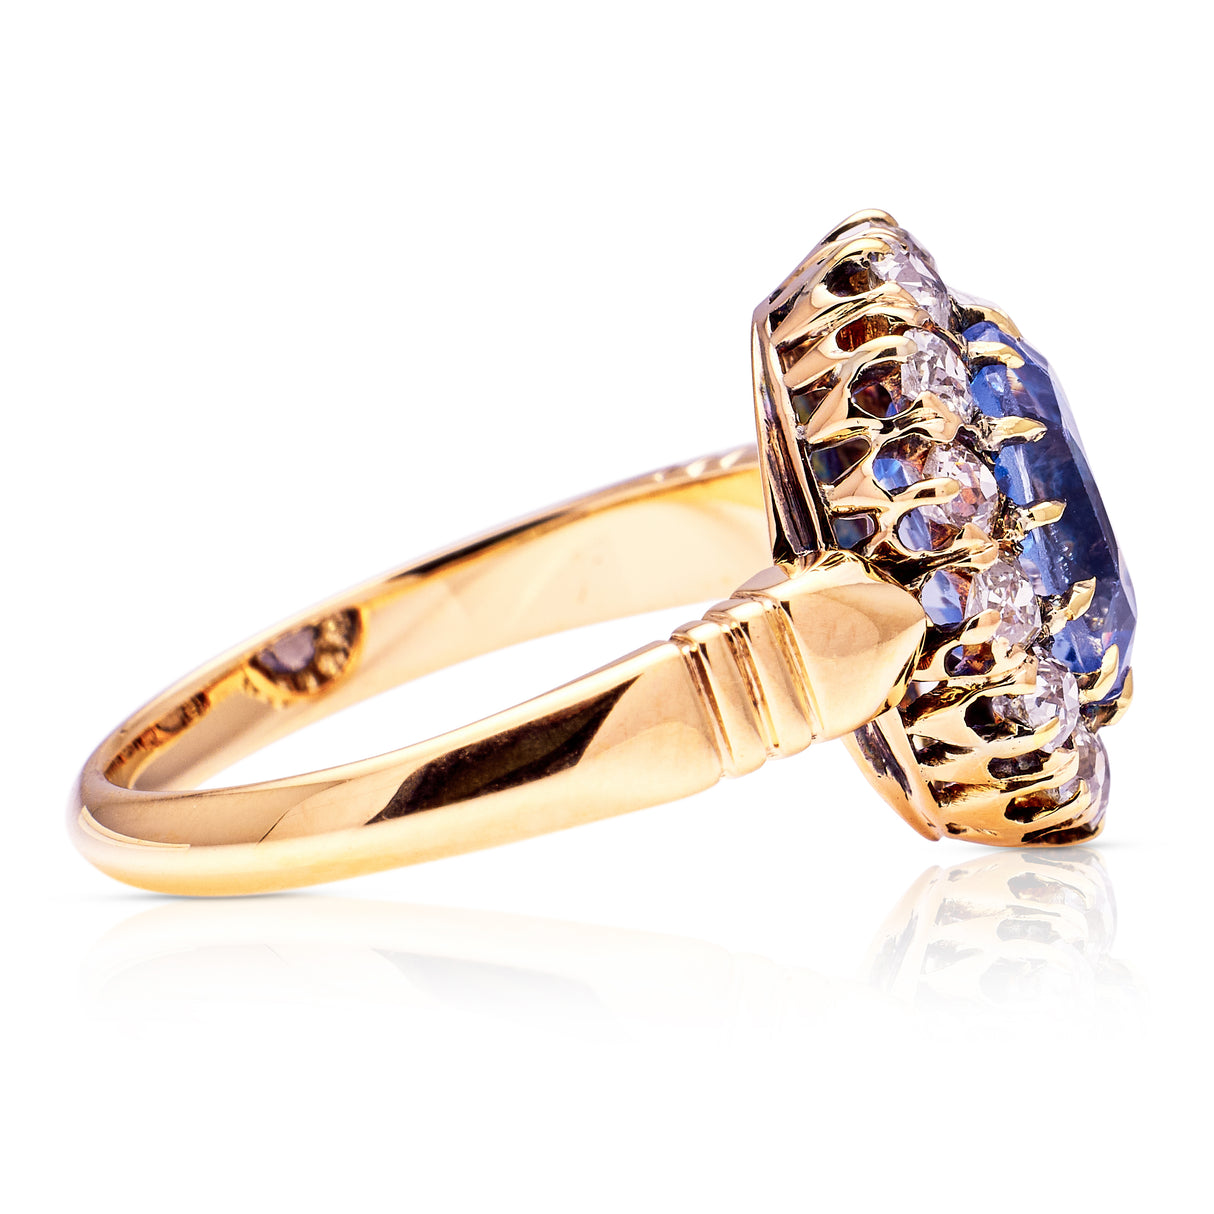 Antique, Edwardian Sapphire and Diamond Cluster Ring, 14ct Yellow Gold side view